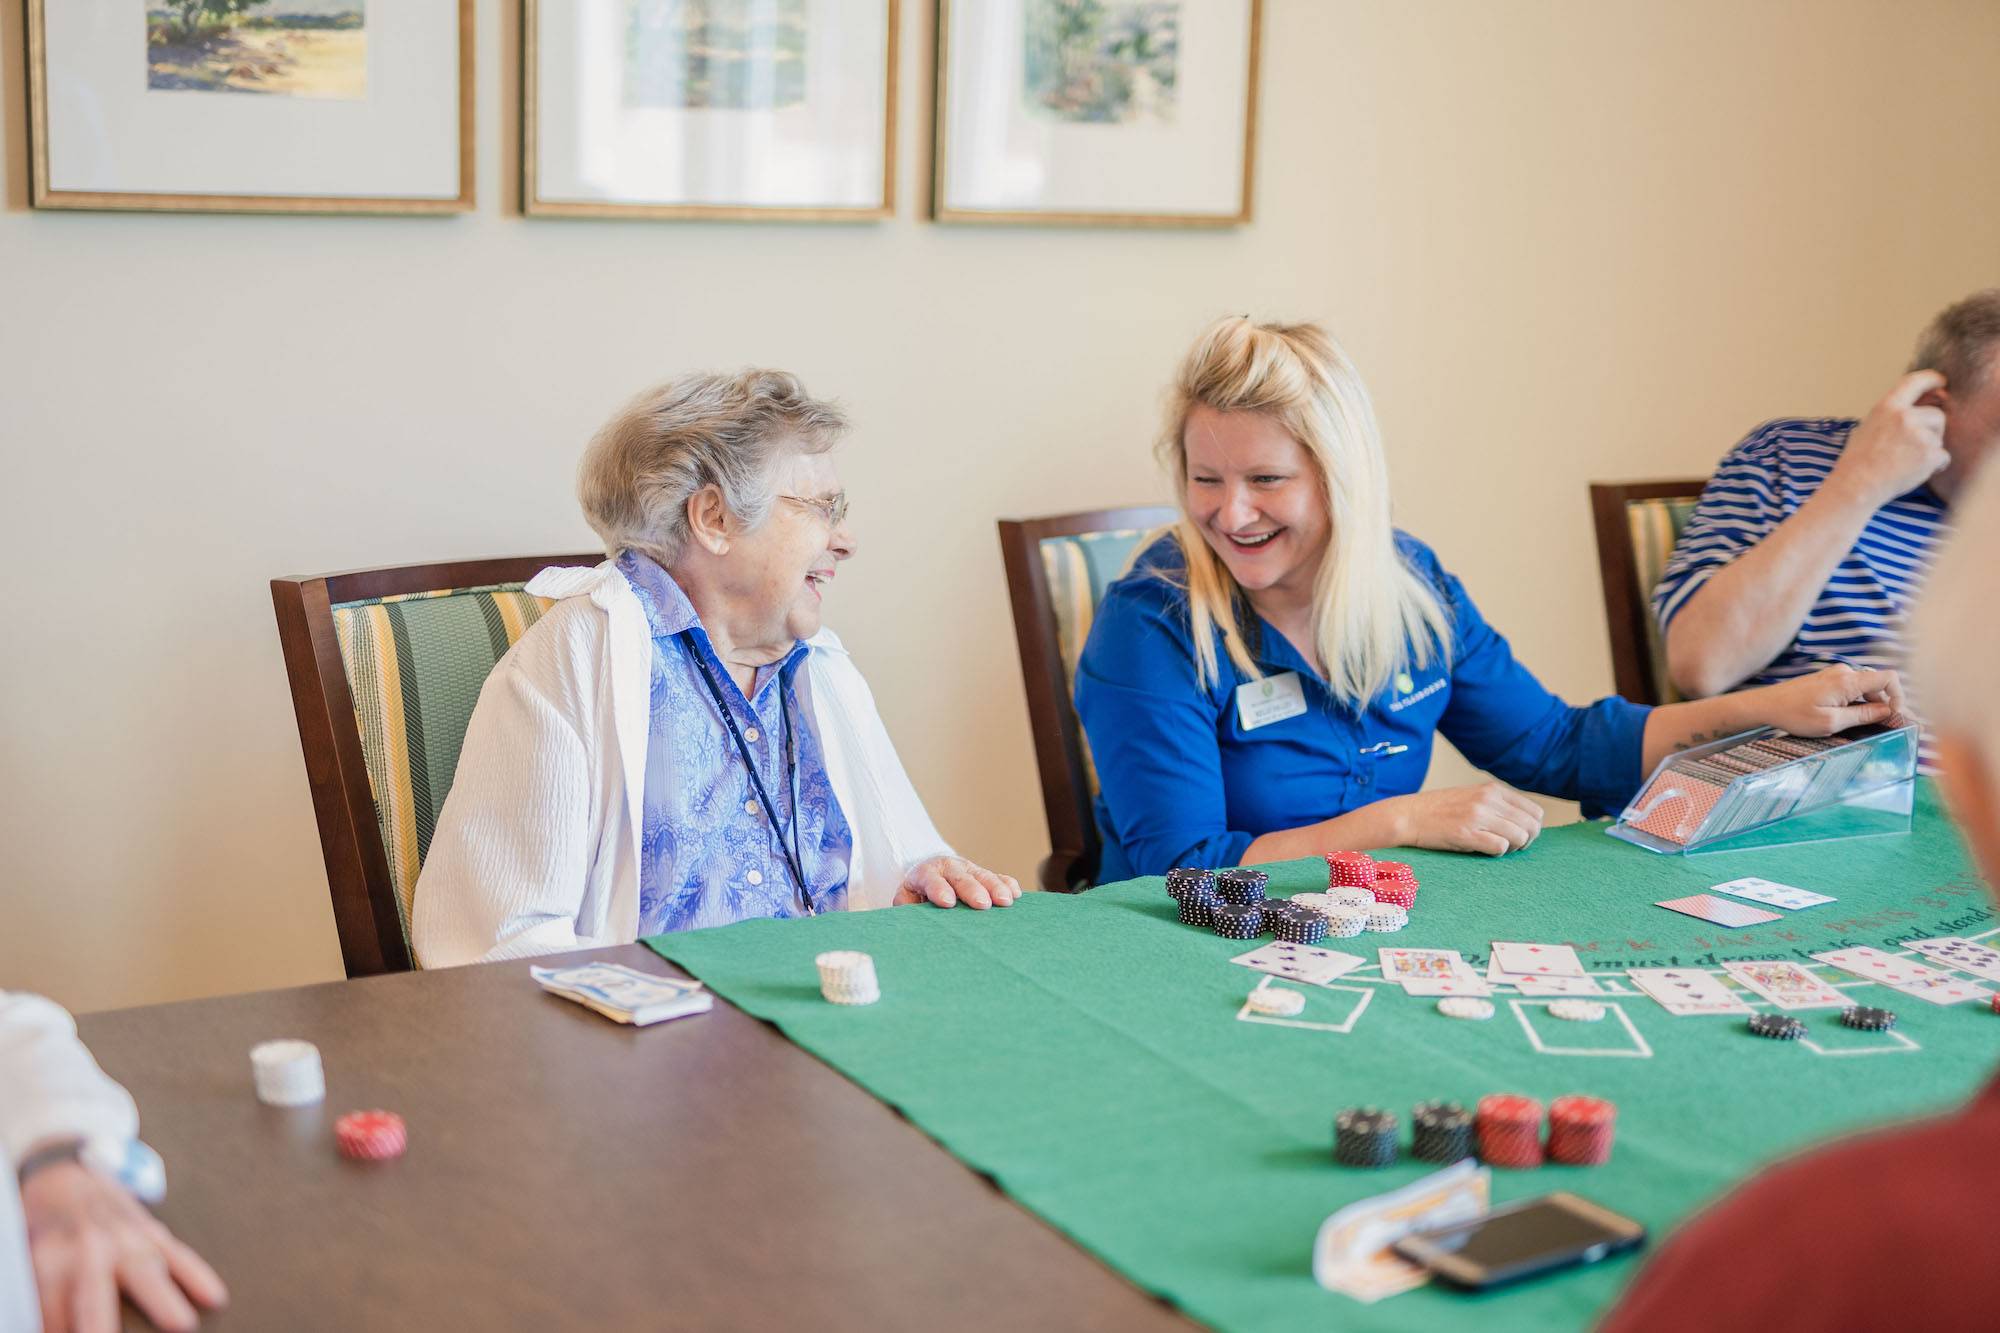 The Claiborne at West Lake senior resident and employee playing cards in the game room